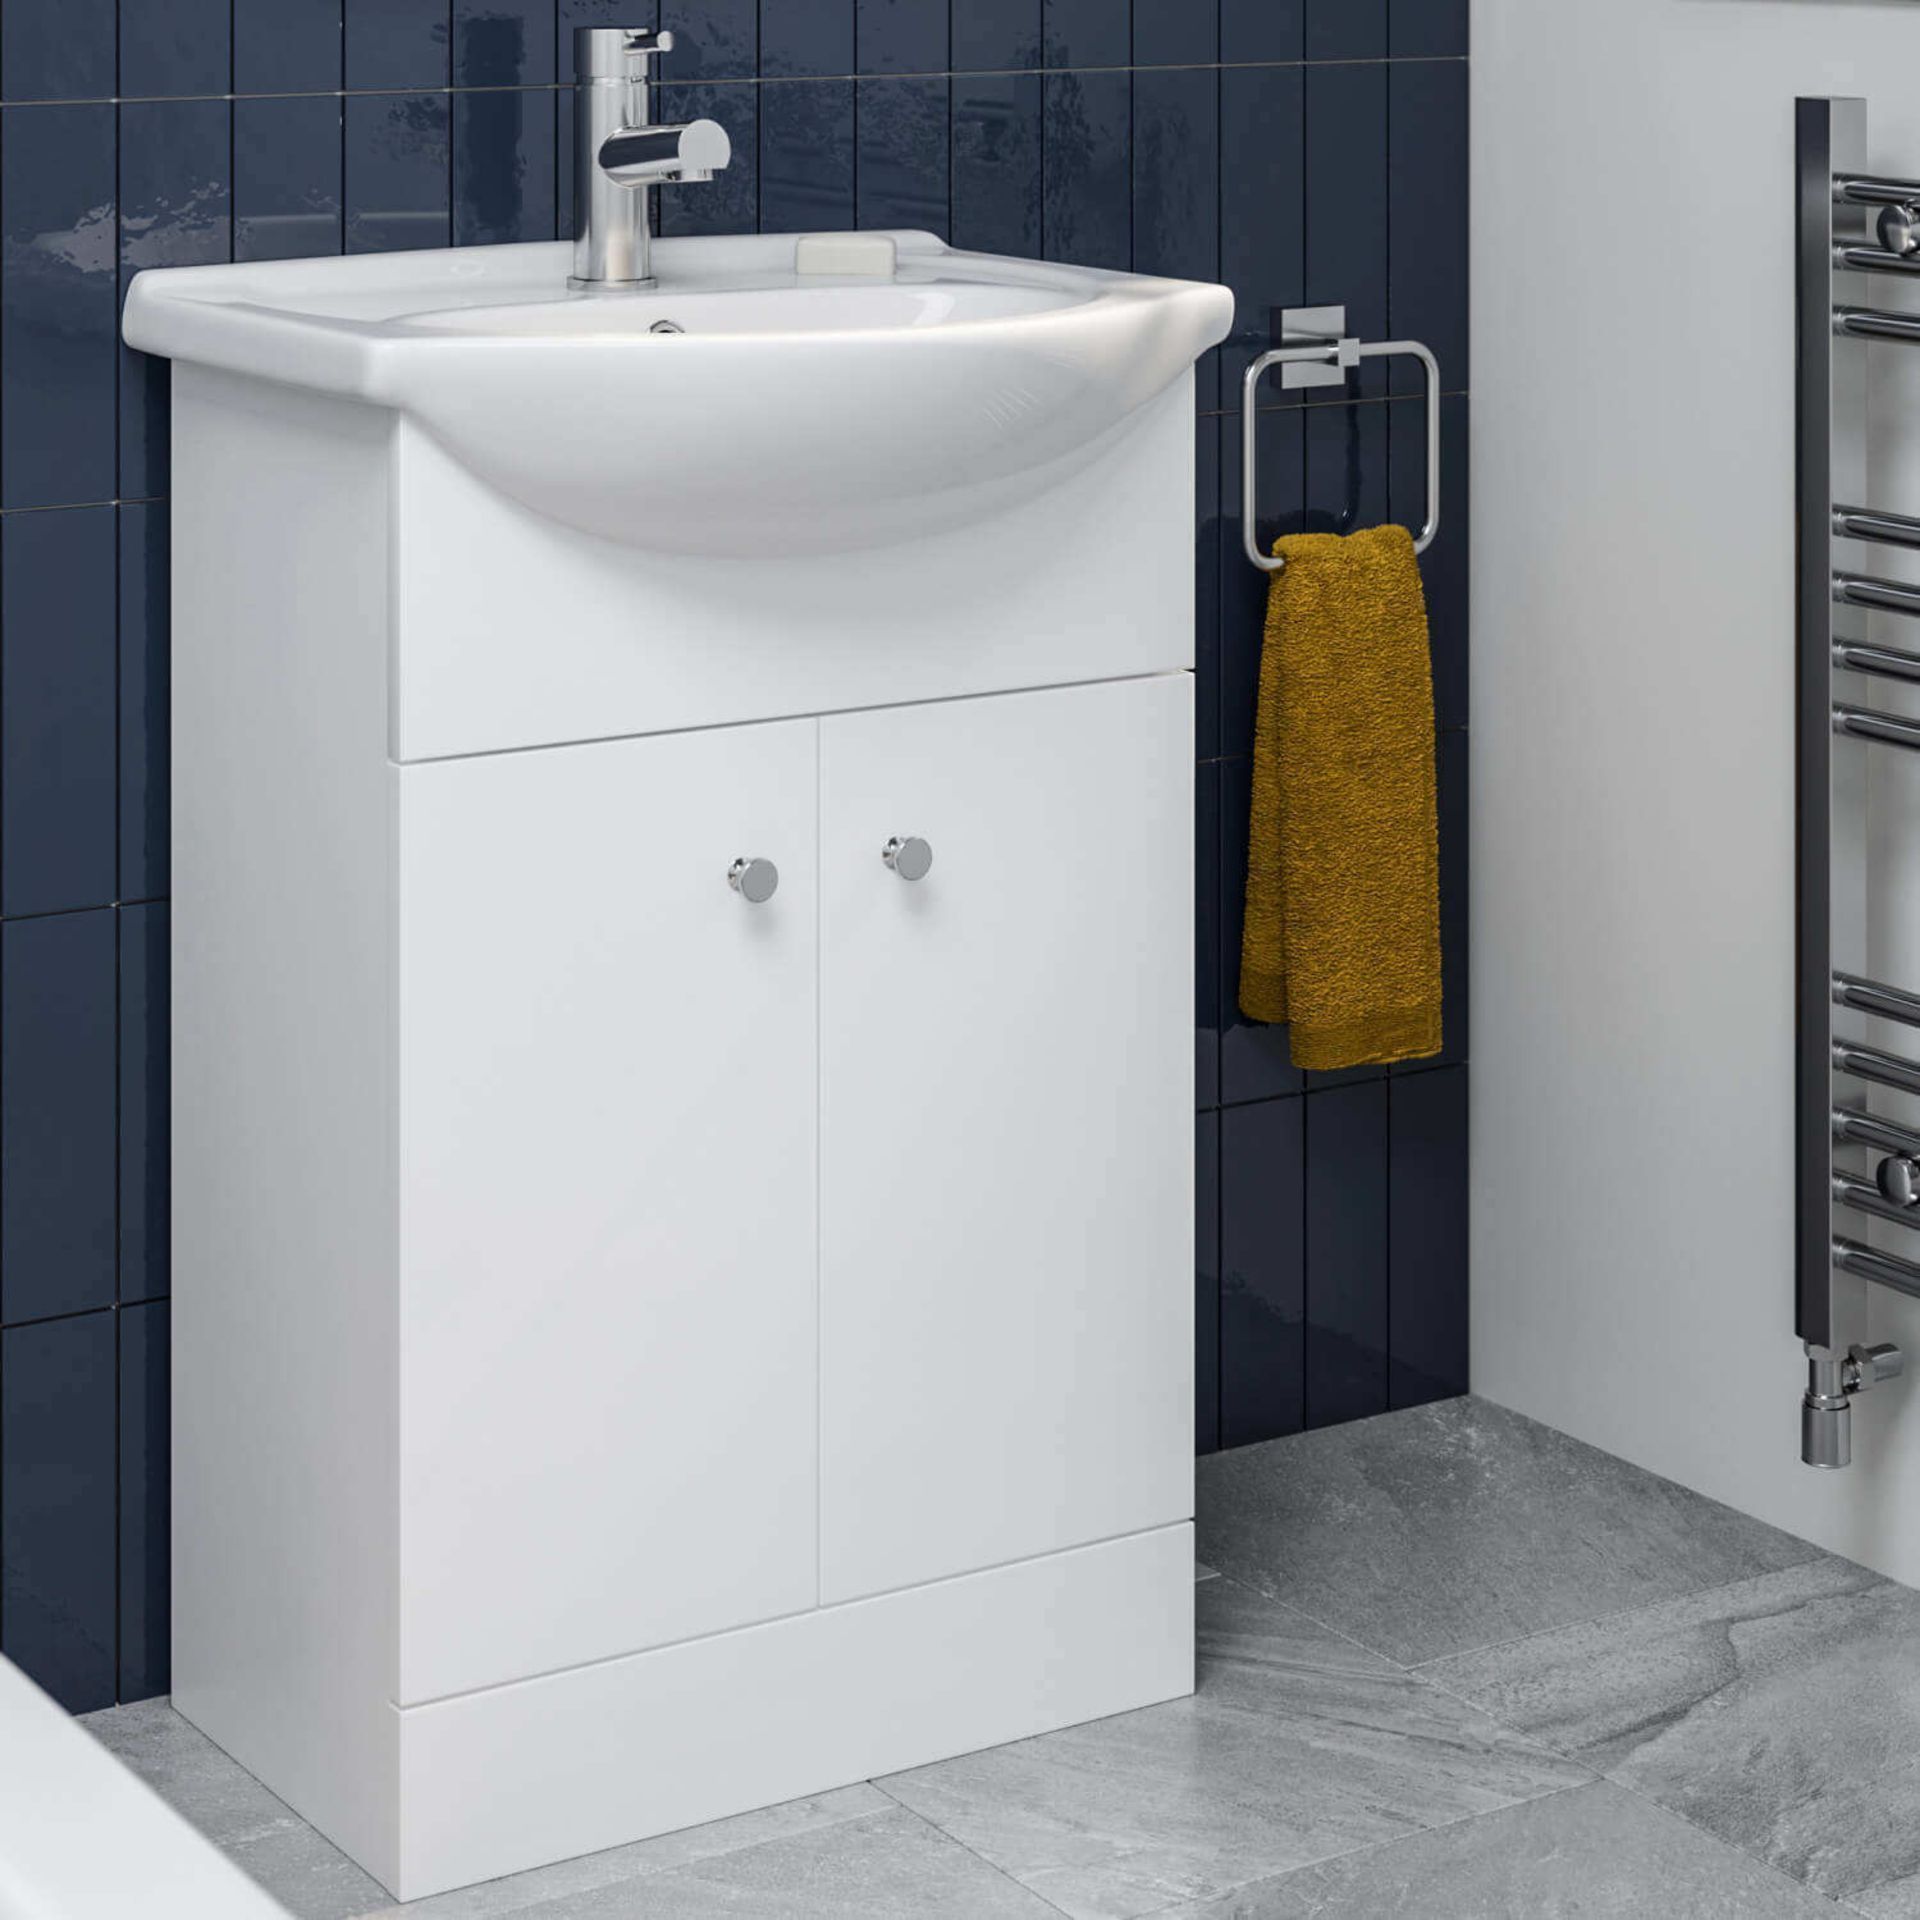 NEW & BOXED 650mm Quartz Basin Sink Vanity Unit Floor Standing White.RRP £399.99.Comes complet... - Image 2 of 2